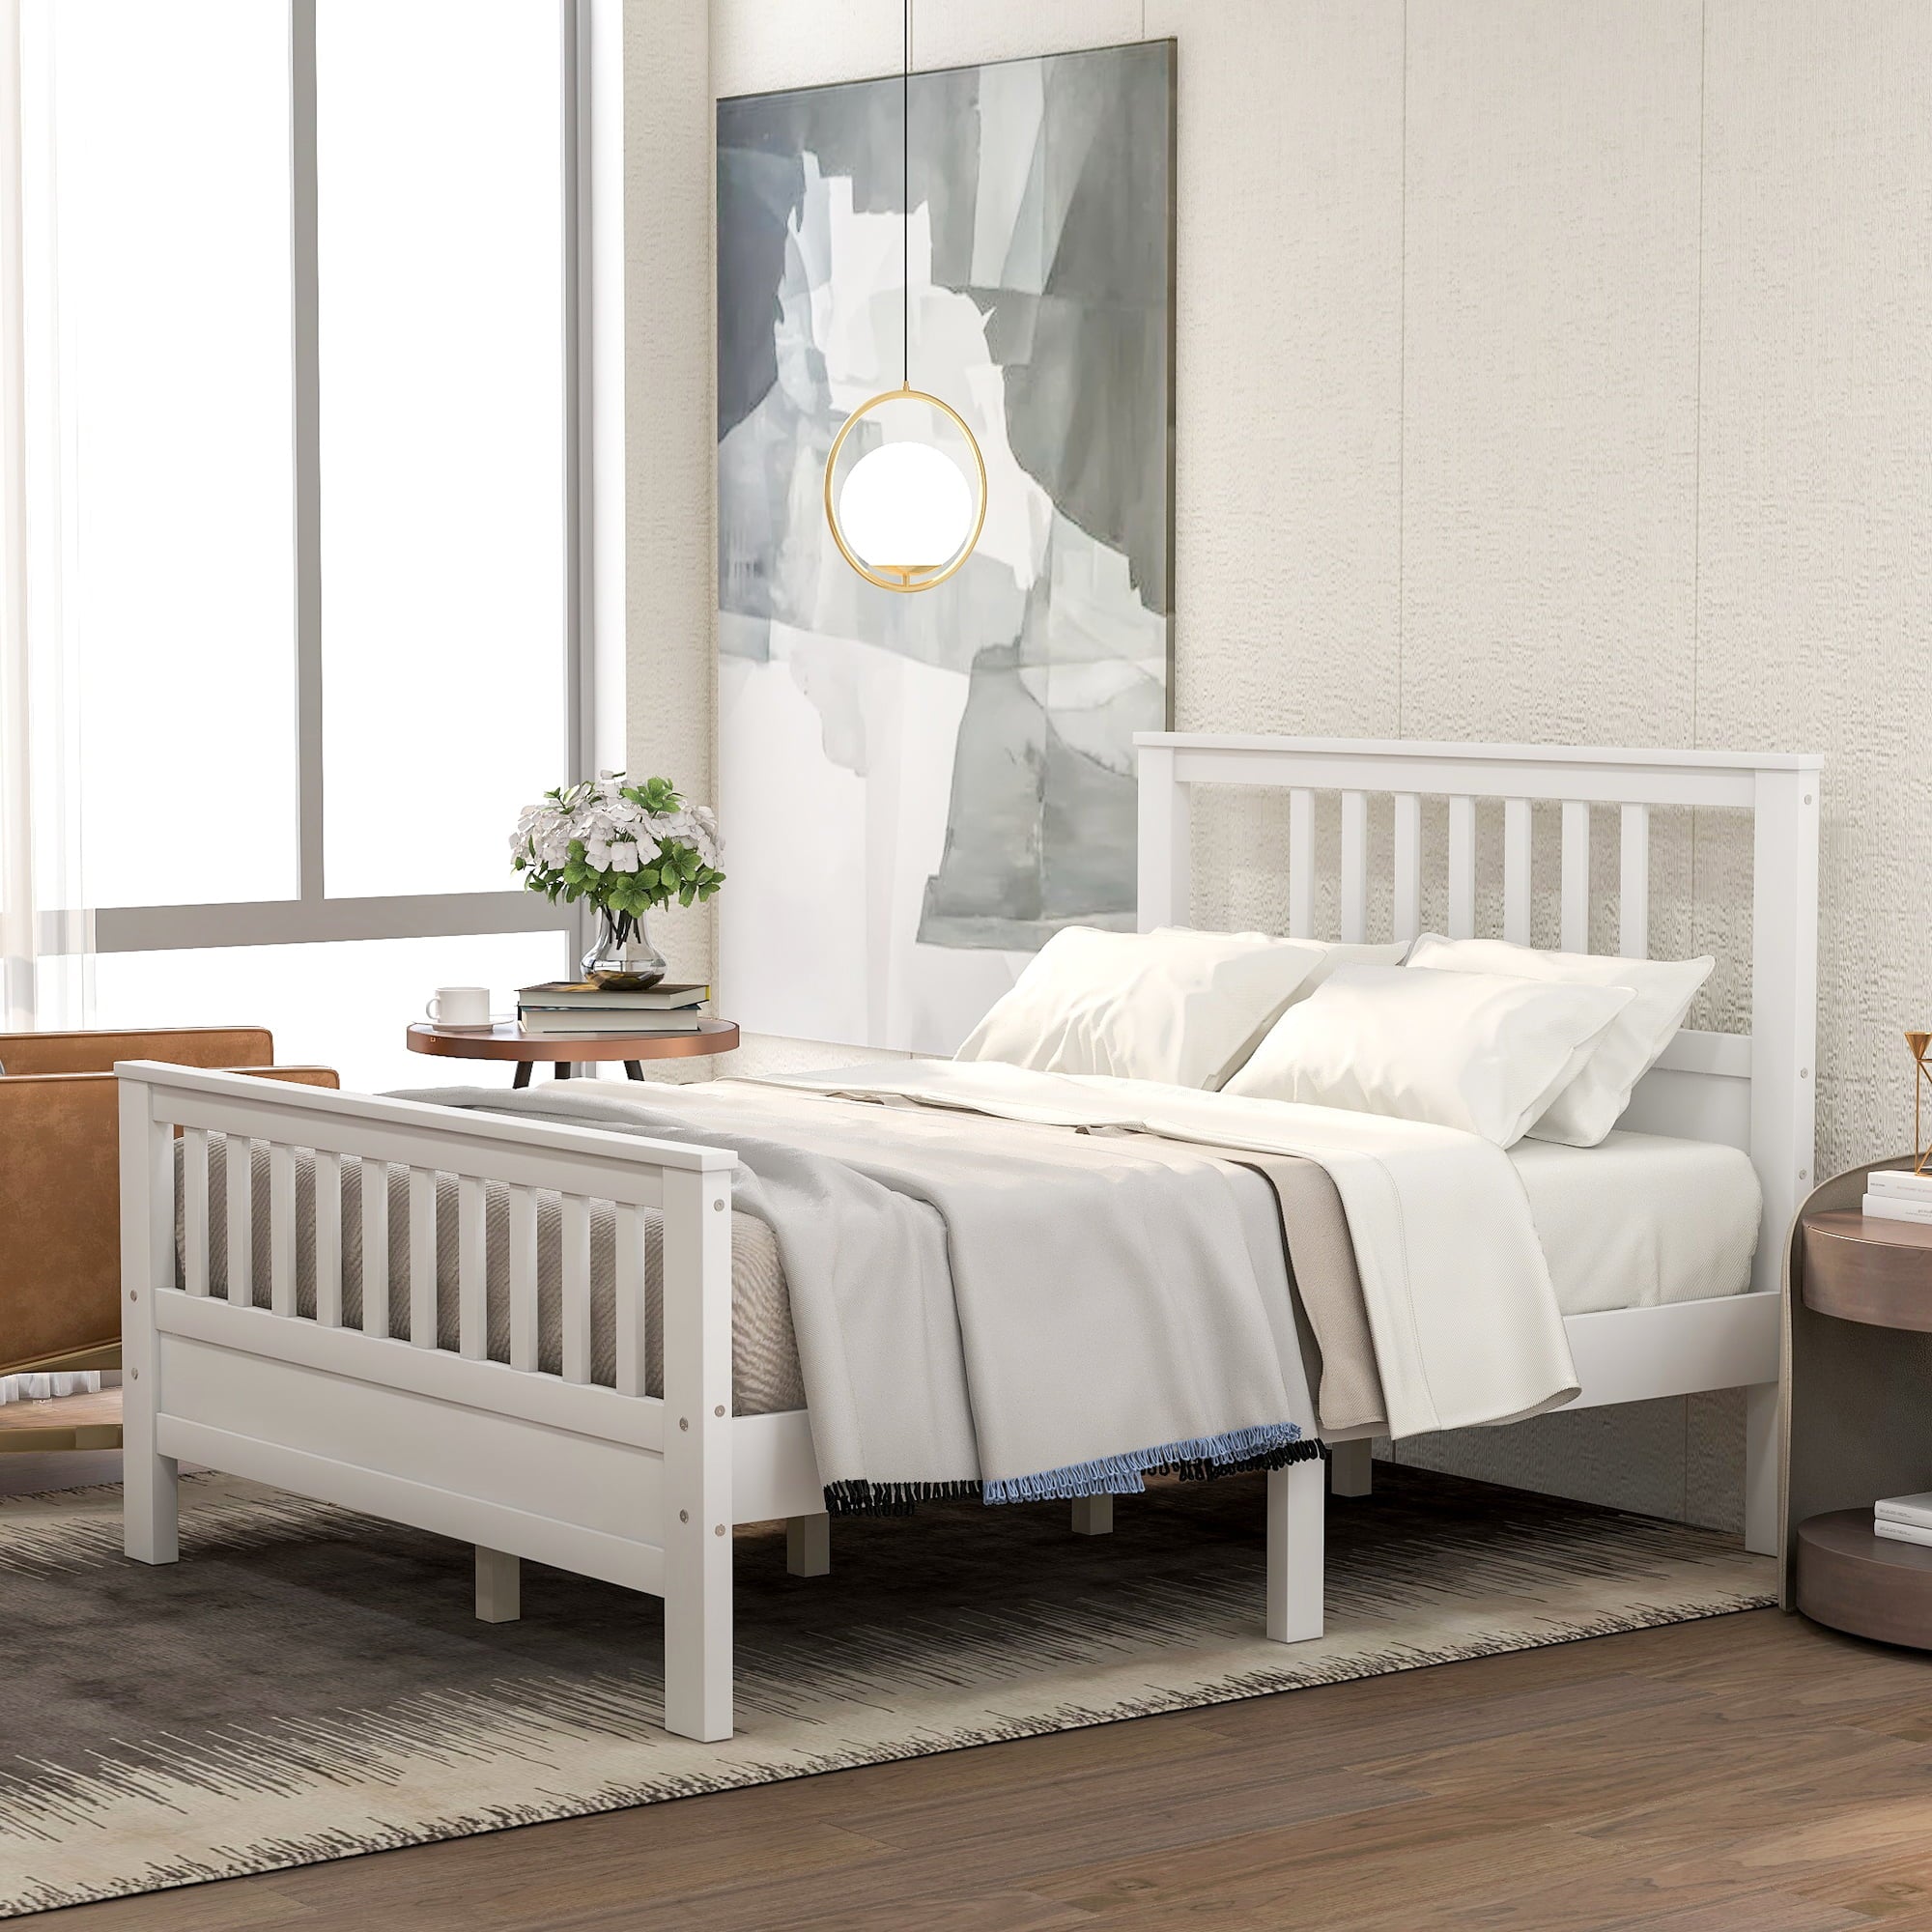 Wood Platform Bed with Headboard, Full Size for Kids (White)